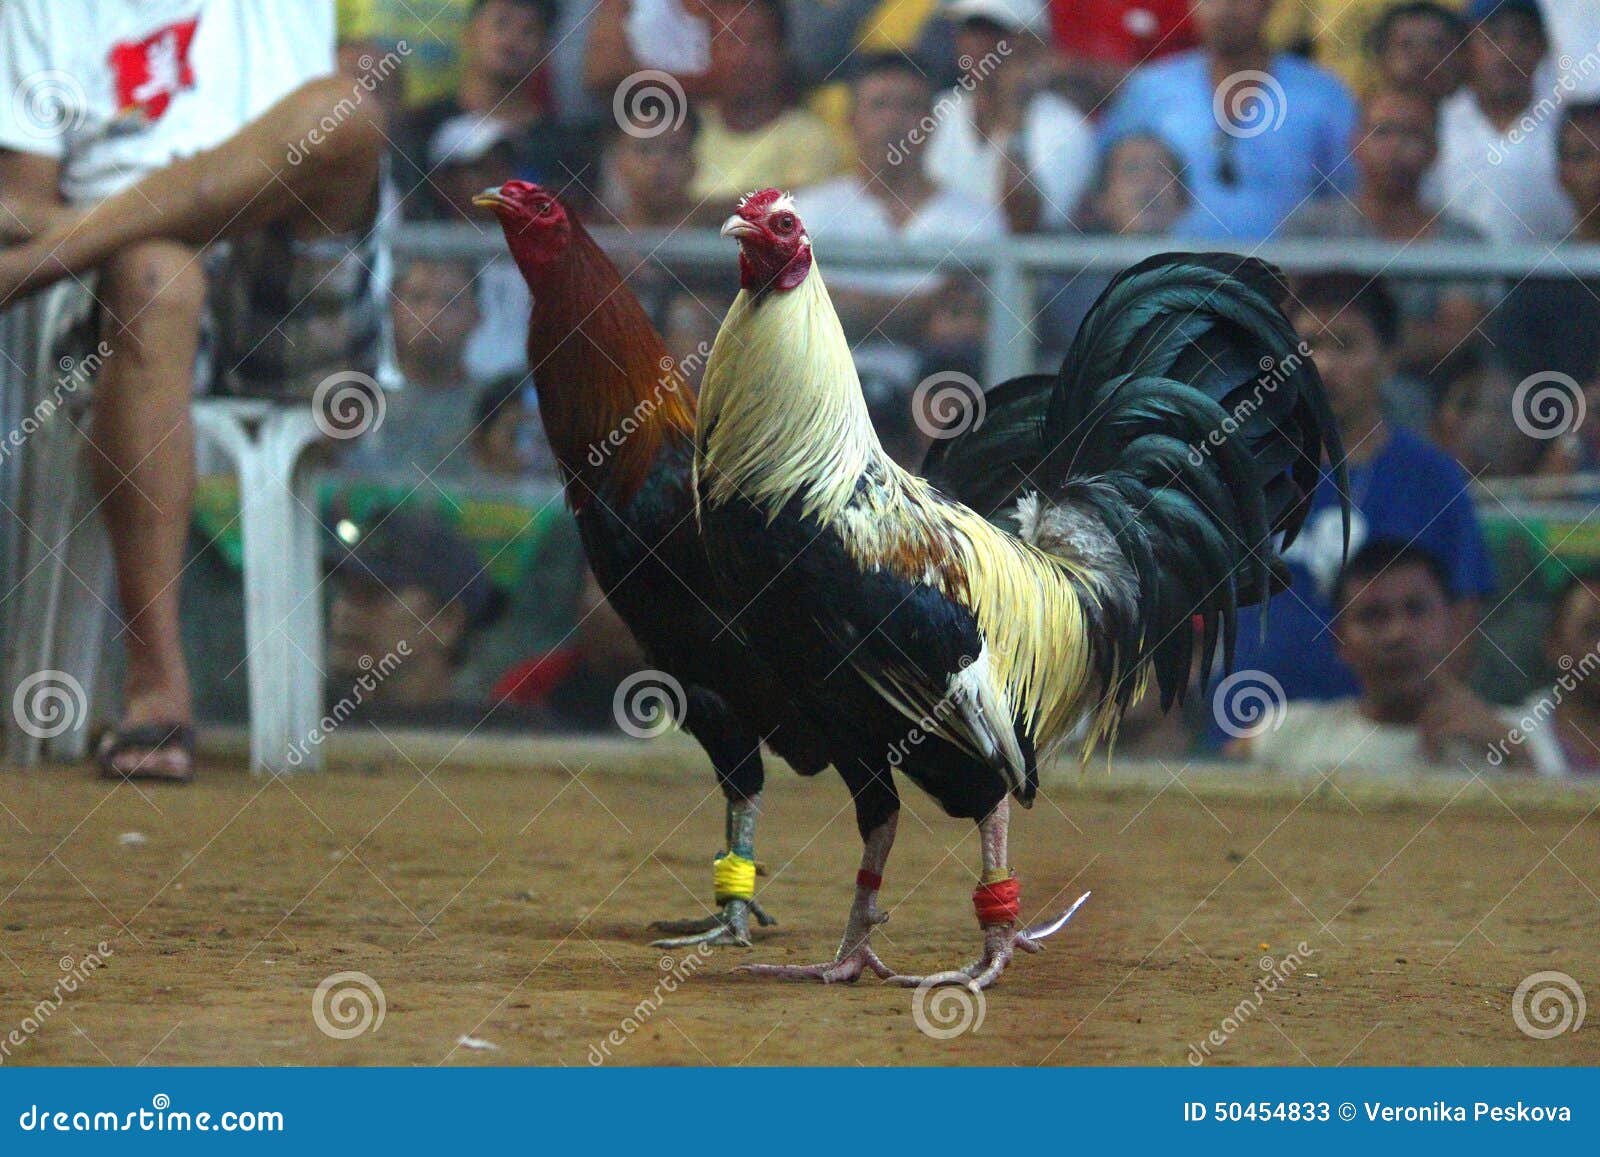 Cock Fighting In Philippines 89